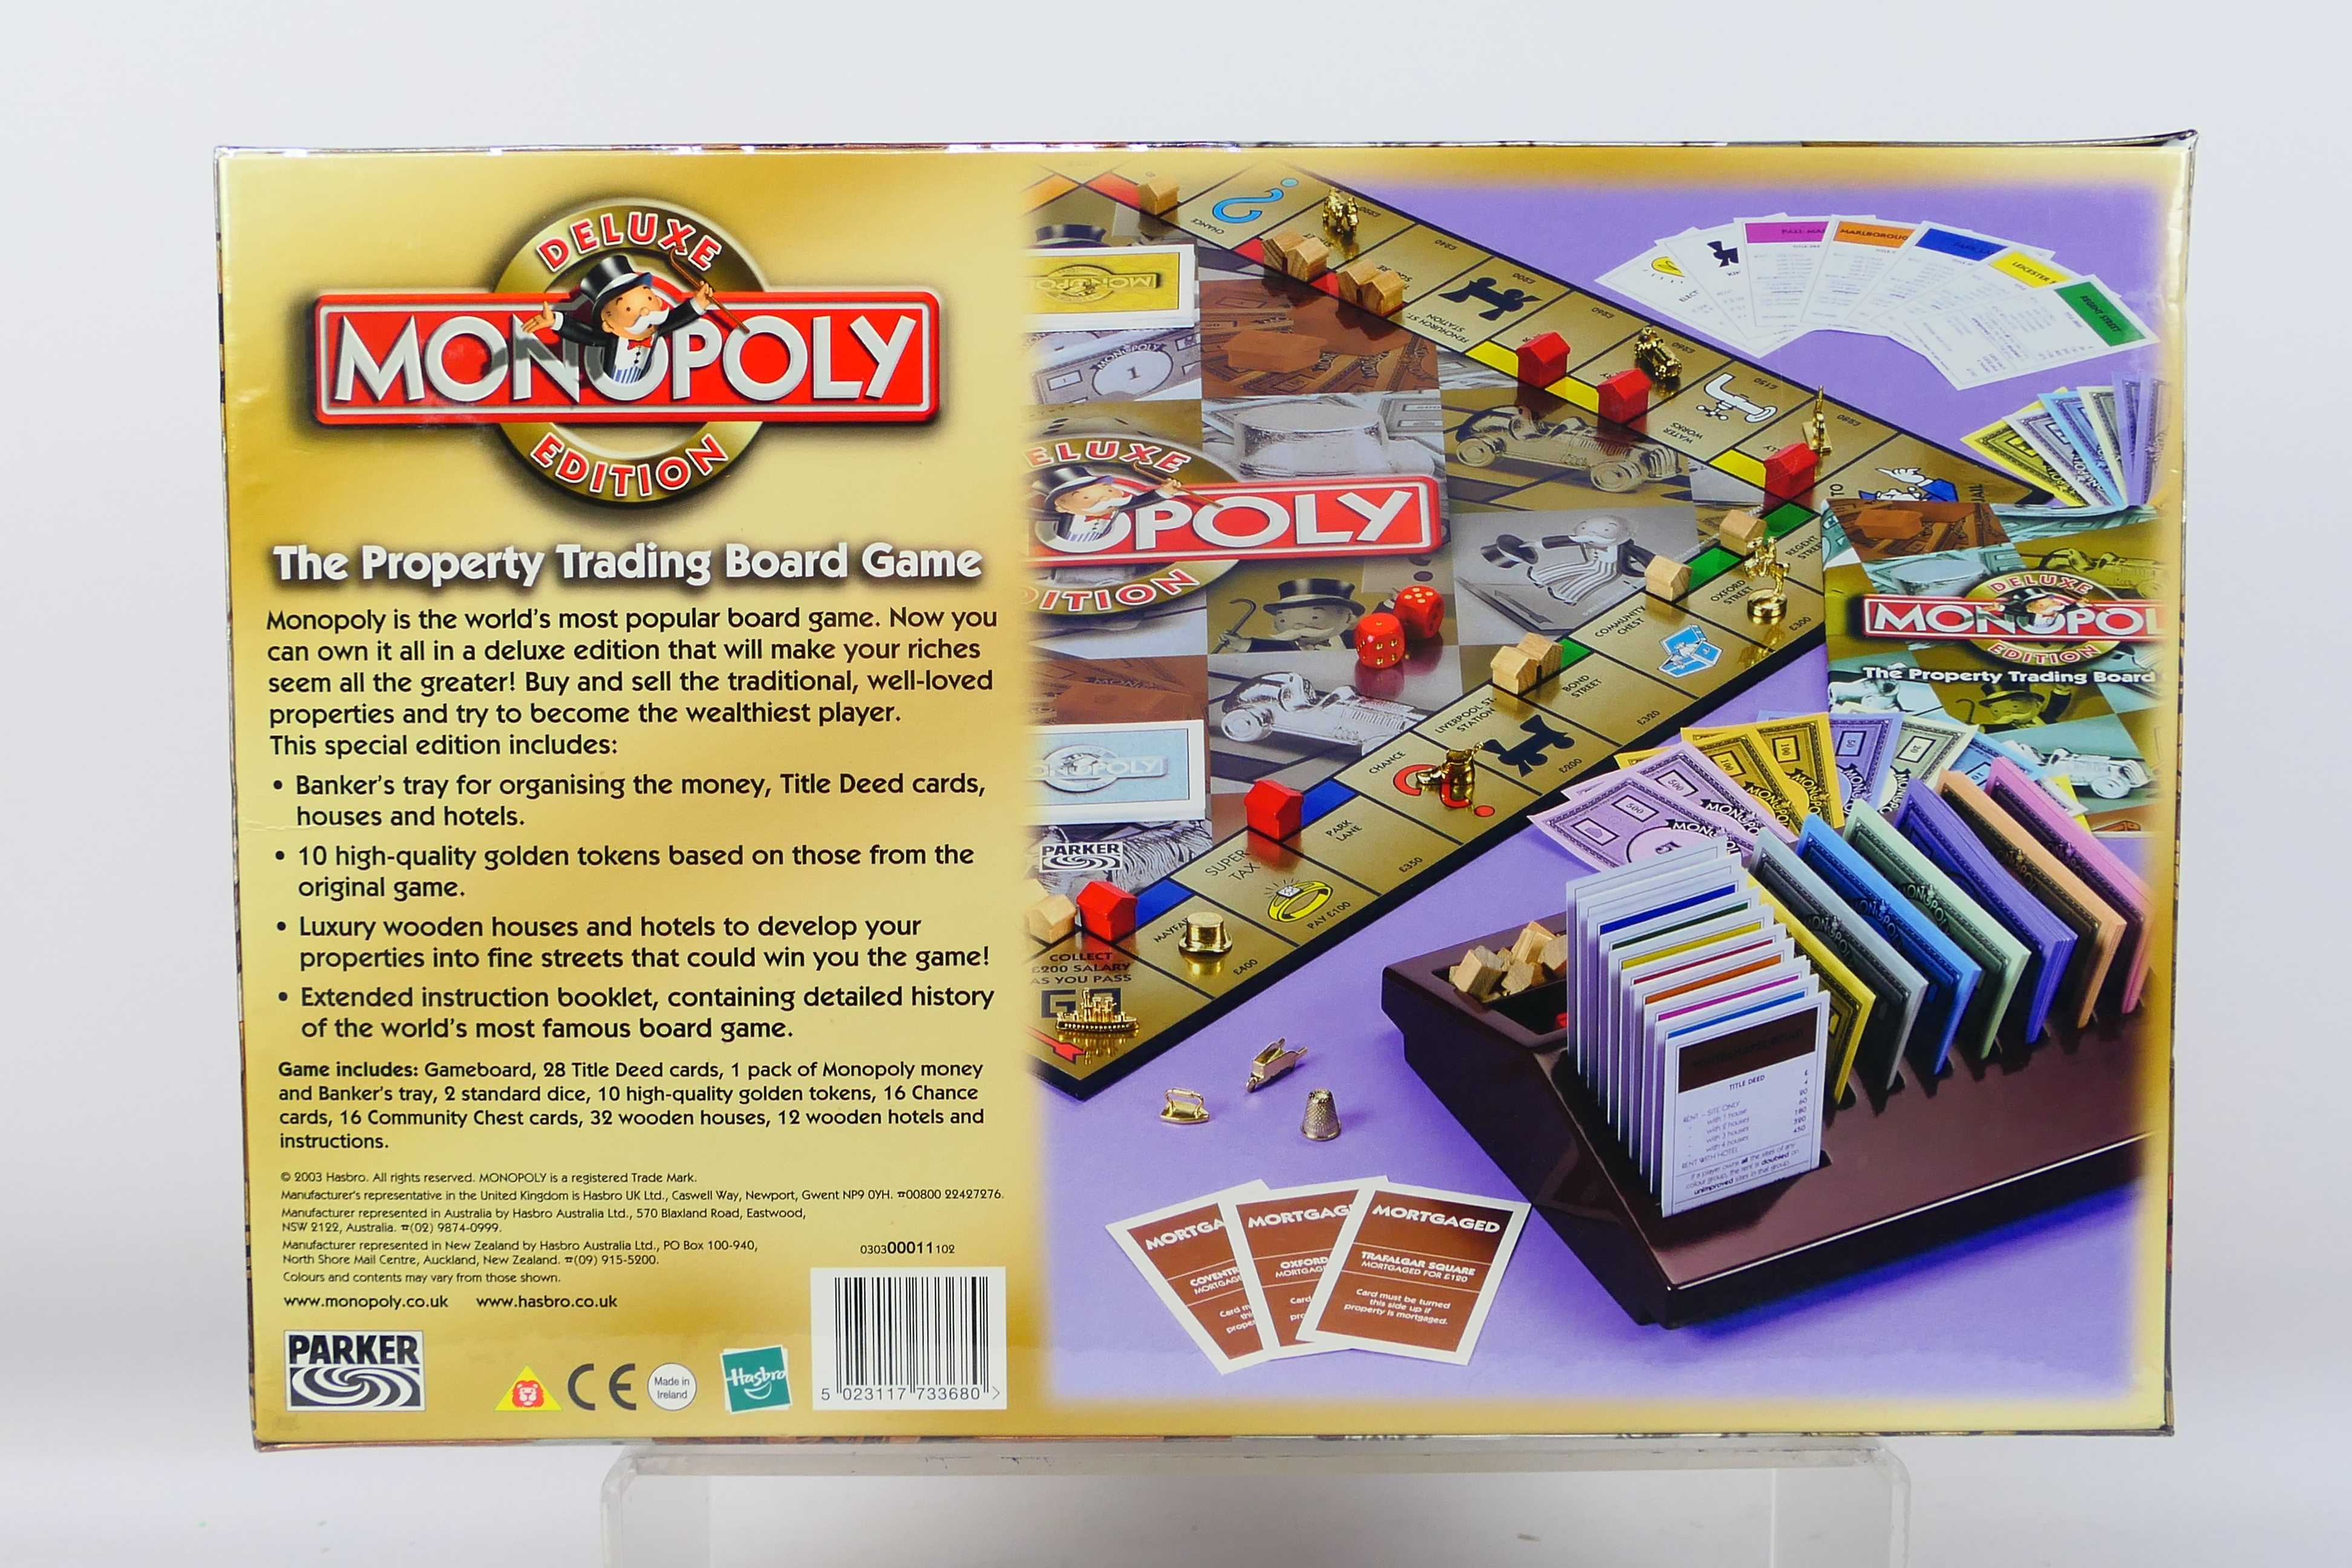 Hasbro - Parker - Monopoly - An unopened - Image 2 of 3